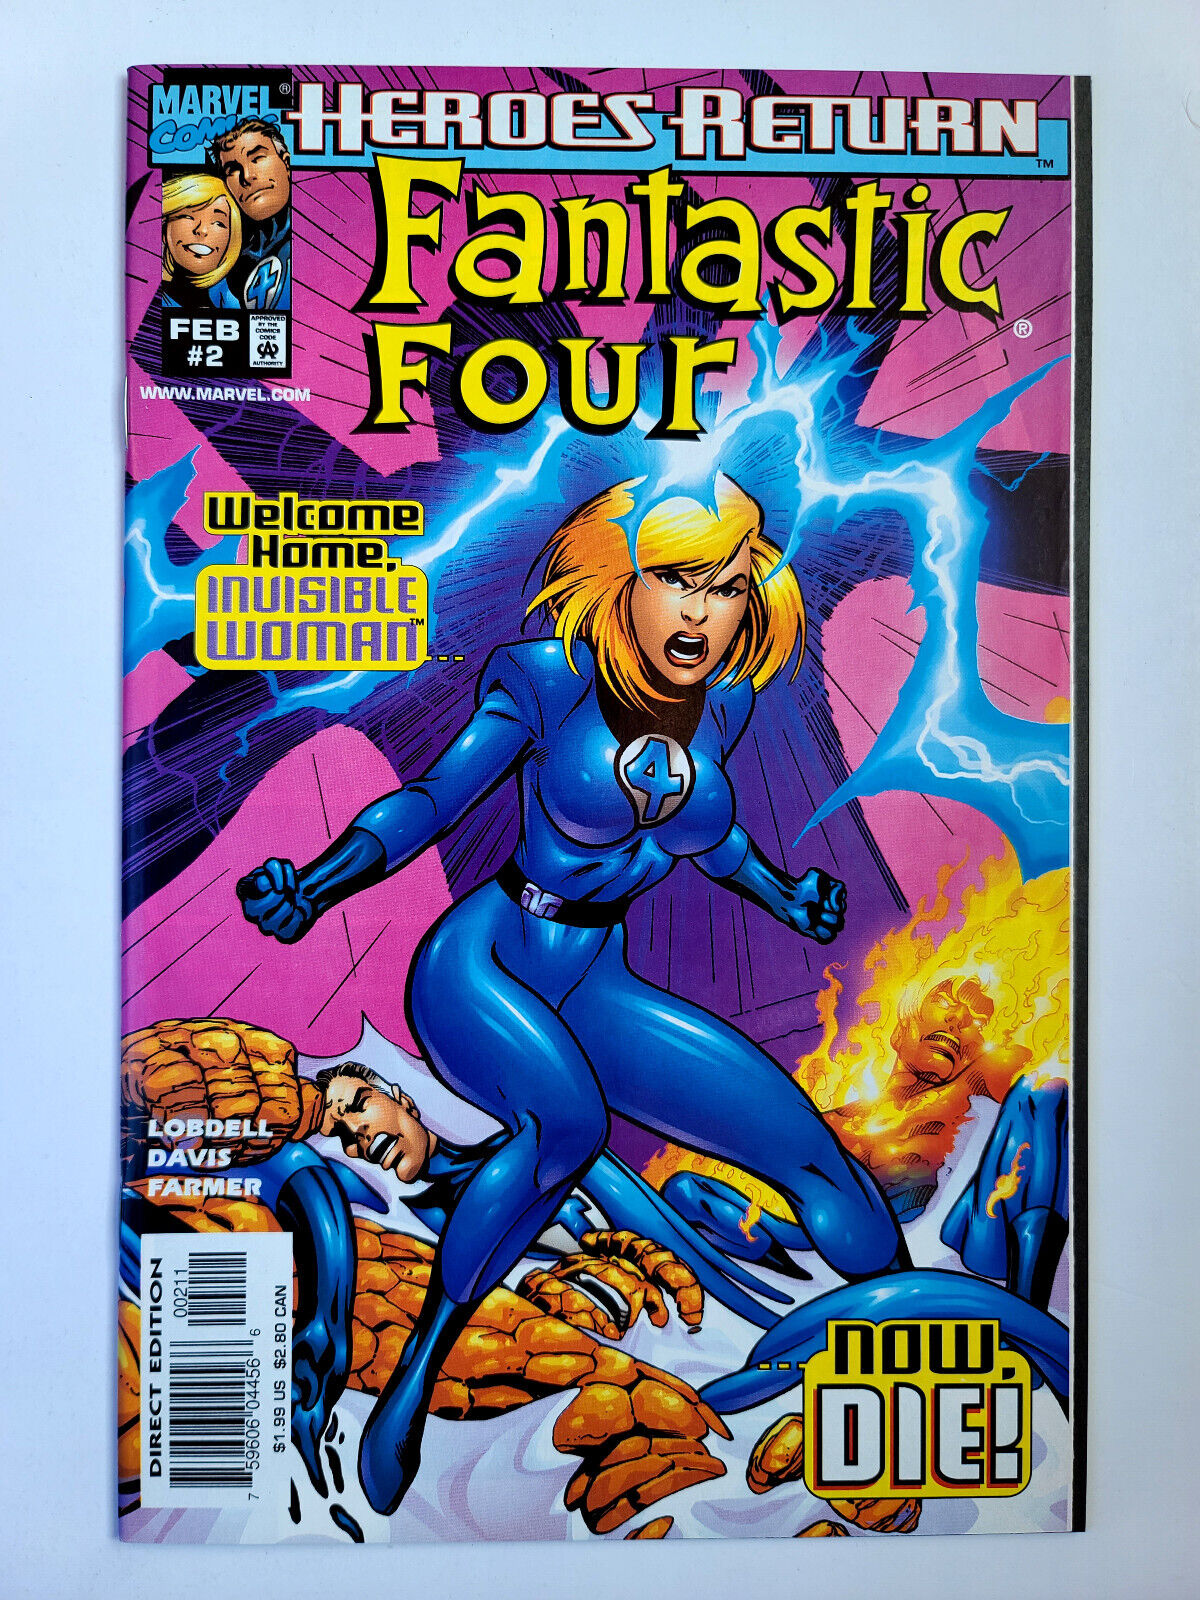 Fantastic Four #1-556 (1998-2008 Marvel Vol. 3) Choose Your Issue